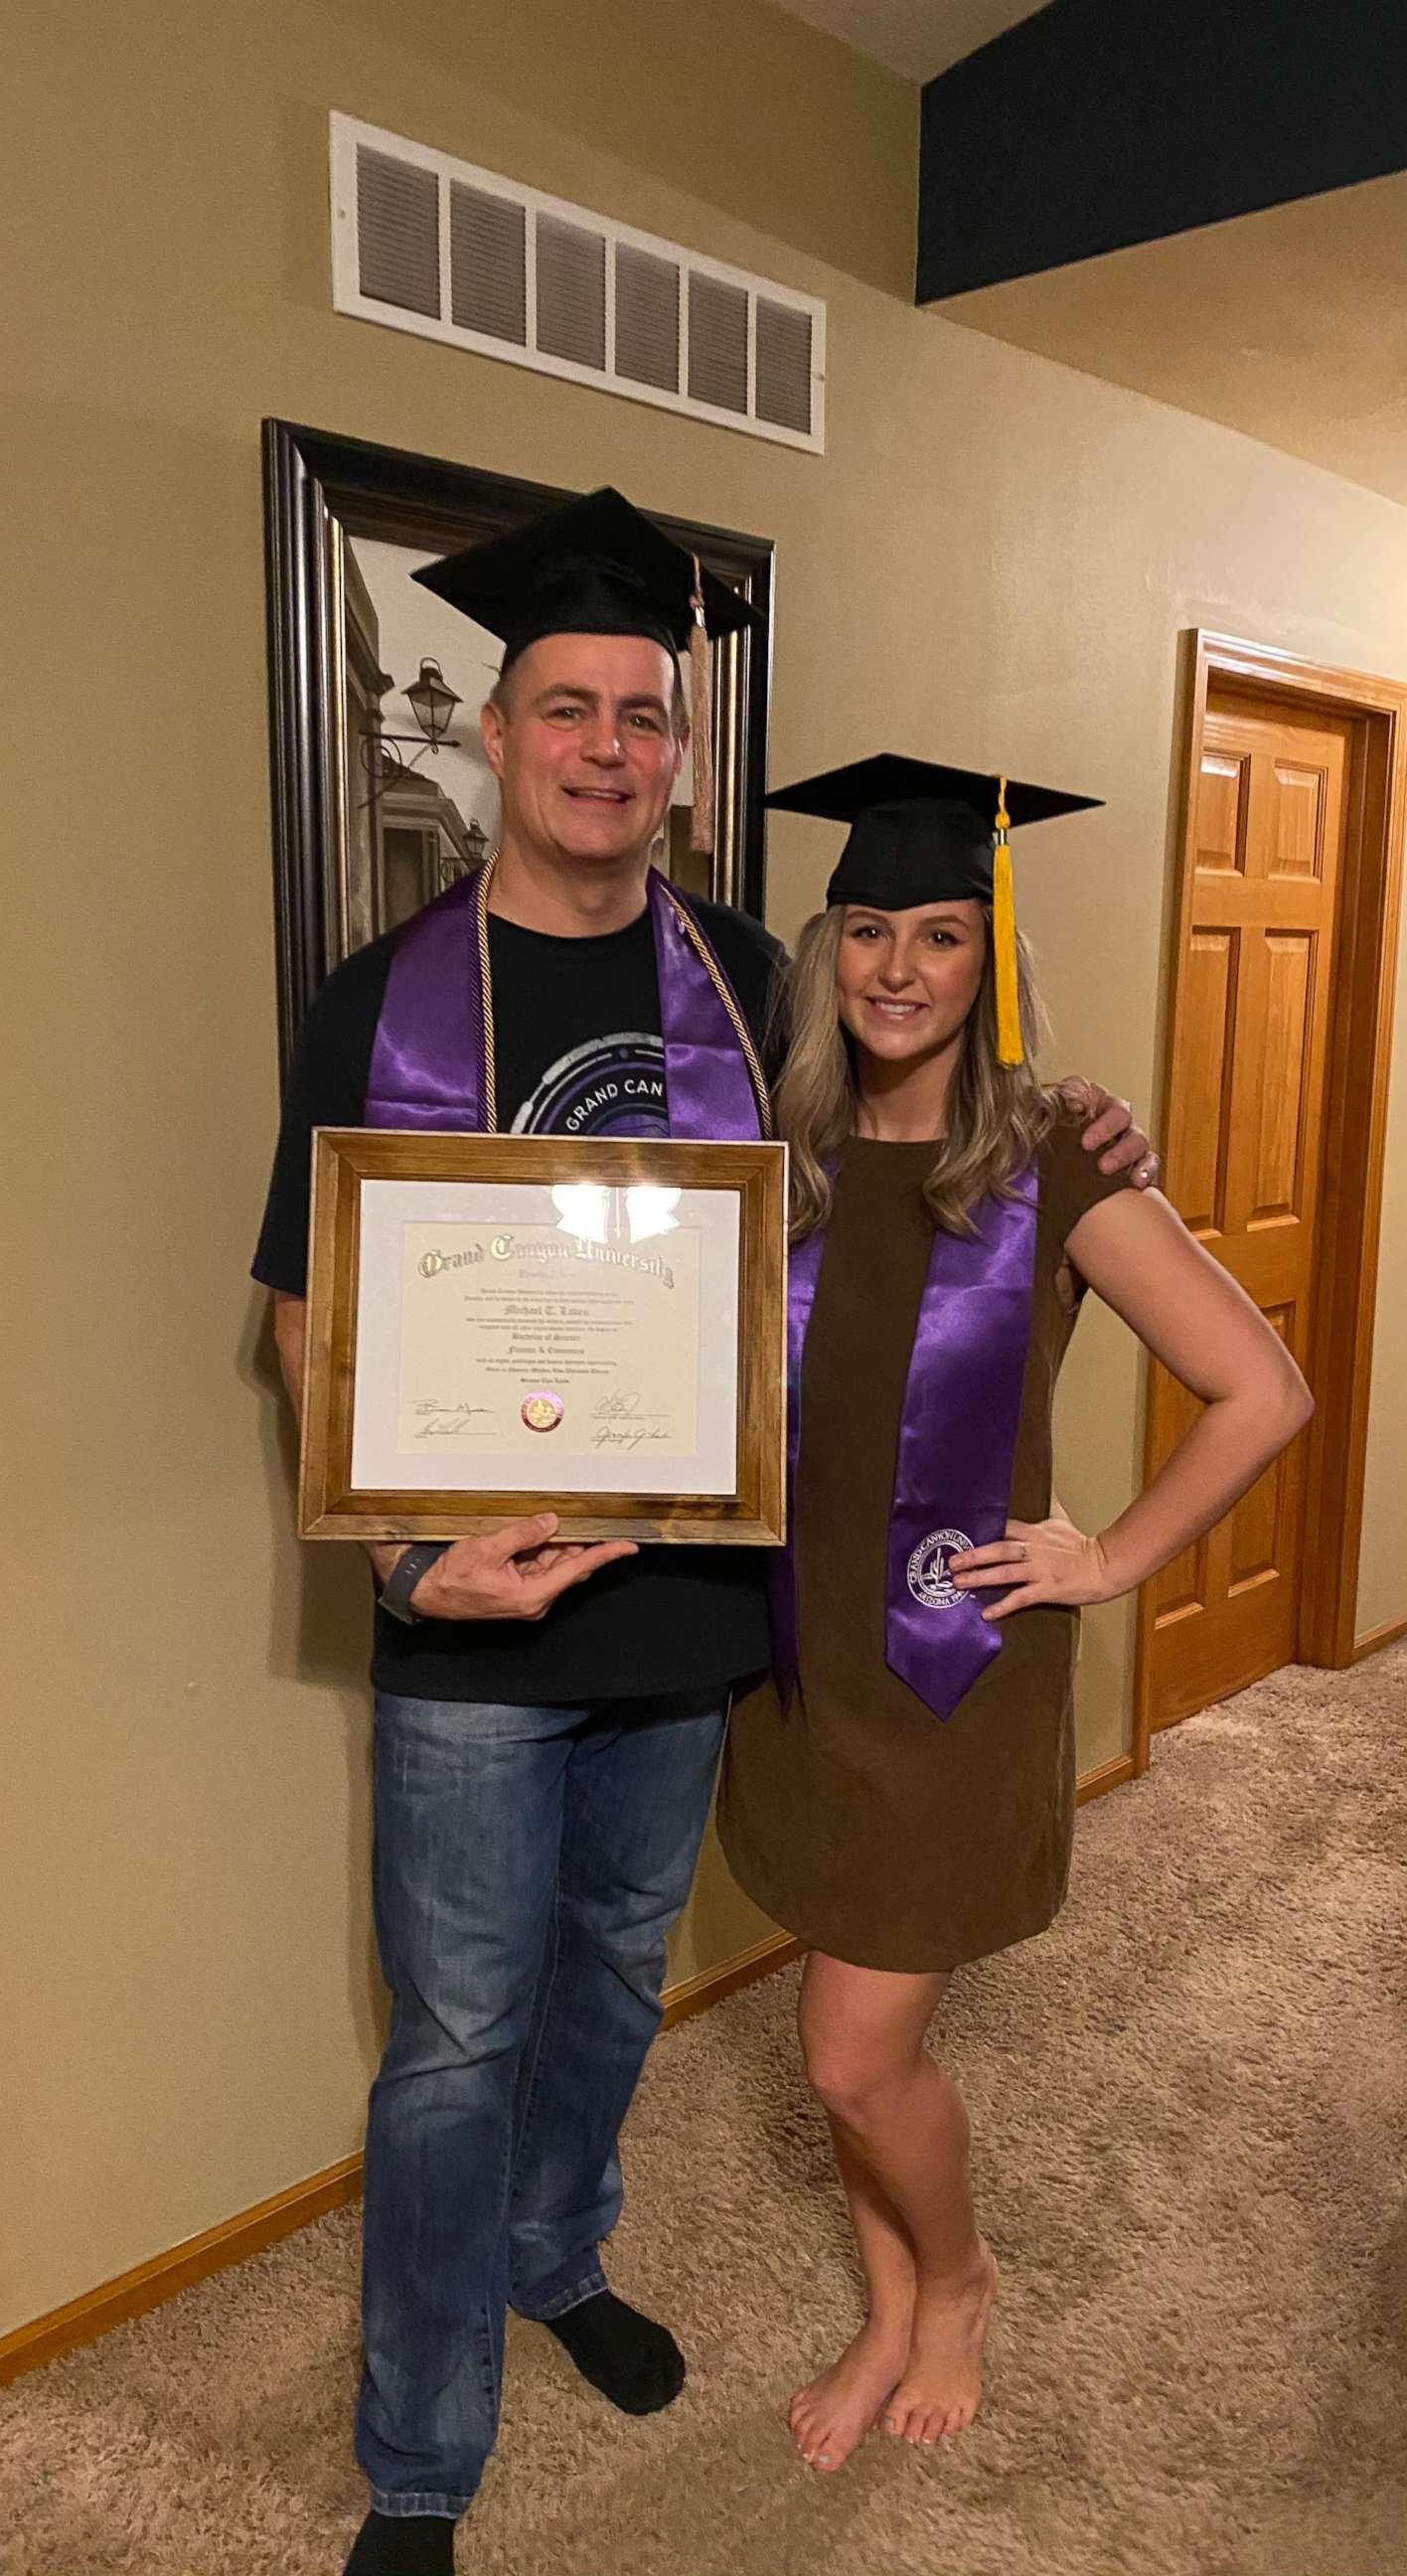 PHOTO: Mike Loven, 47, of Machesney Park, received a bachelor’s degree in finance and economics with a 3.99 GPA from Grand Canyon University in Phoenix, Arizona, last October. His daughter, Taleigh Loven, 23, earned her bachelor's degree in psychology. 